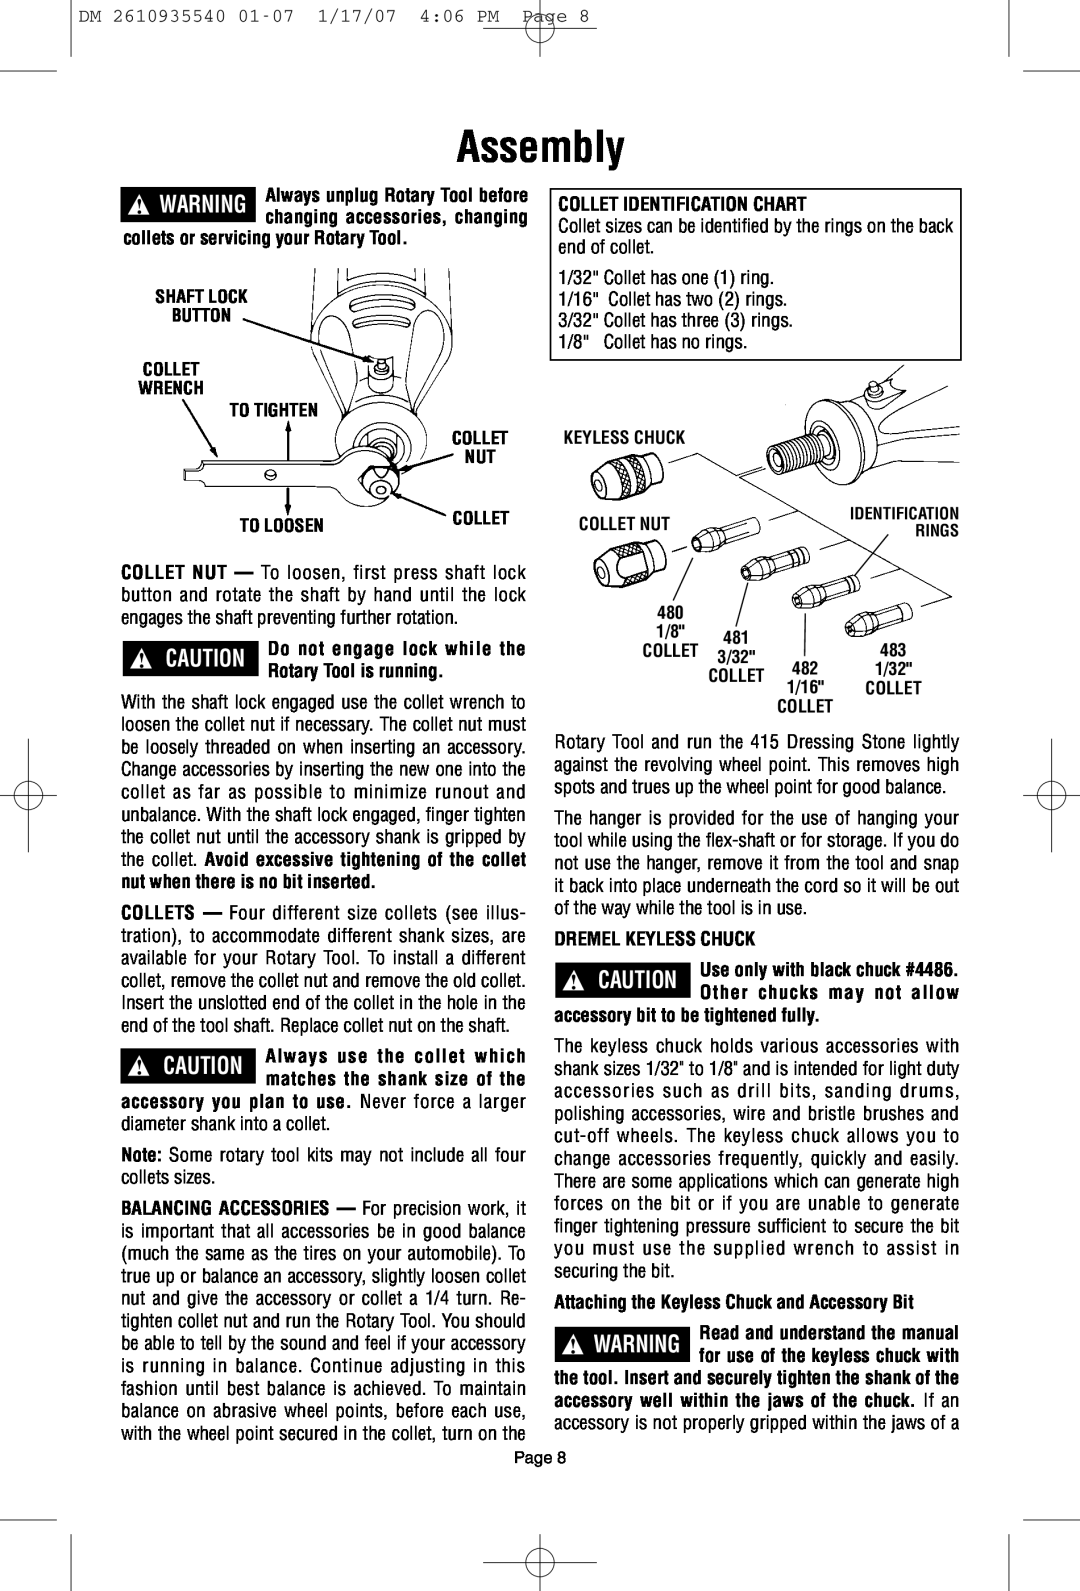 Dremel F013039519 Assembly, collets or servicing your Rotary Tool, Rotary Tool is running, Collet Identification Chart 